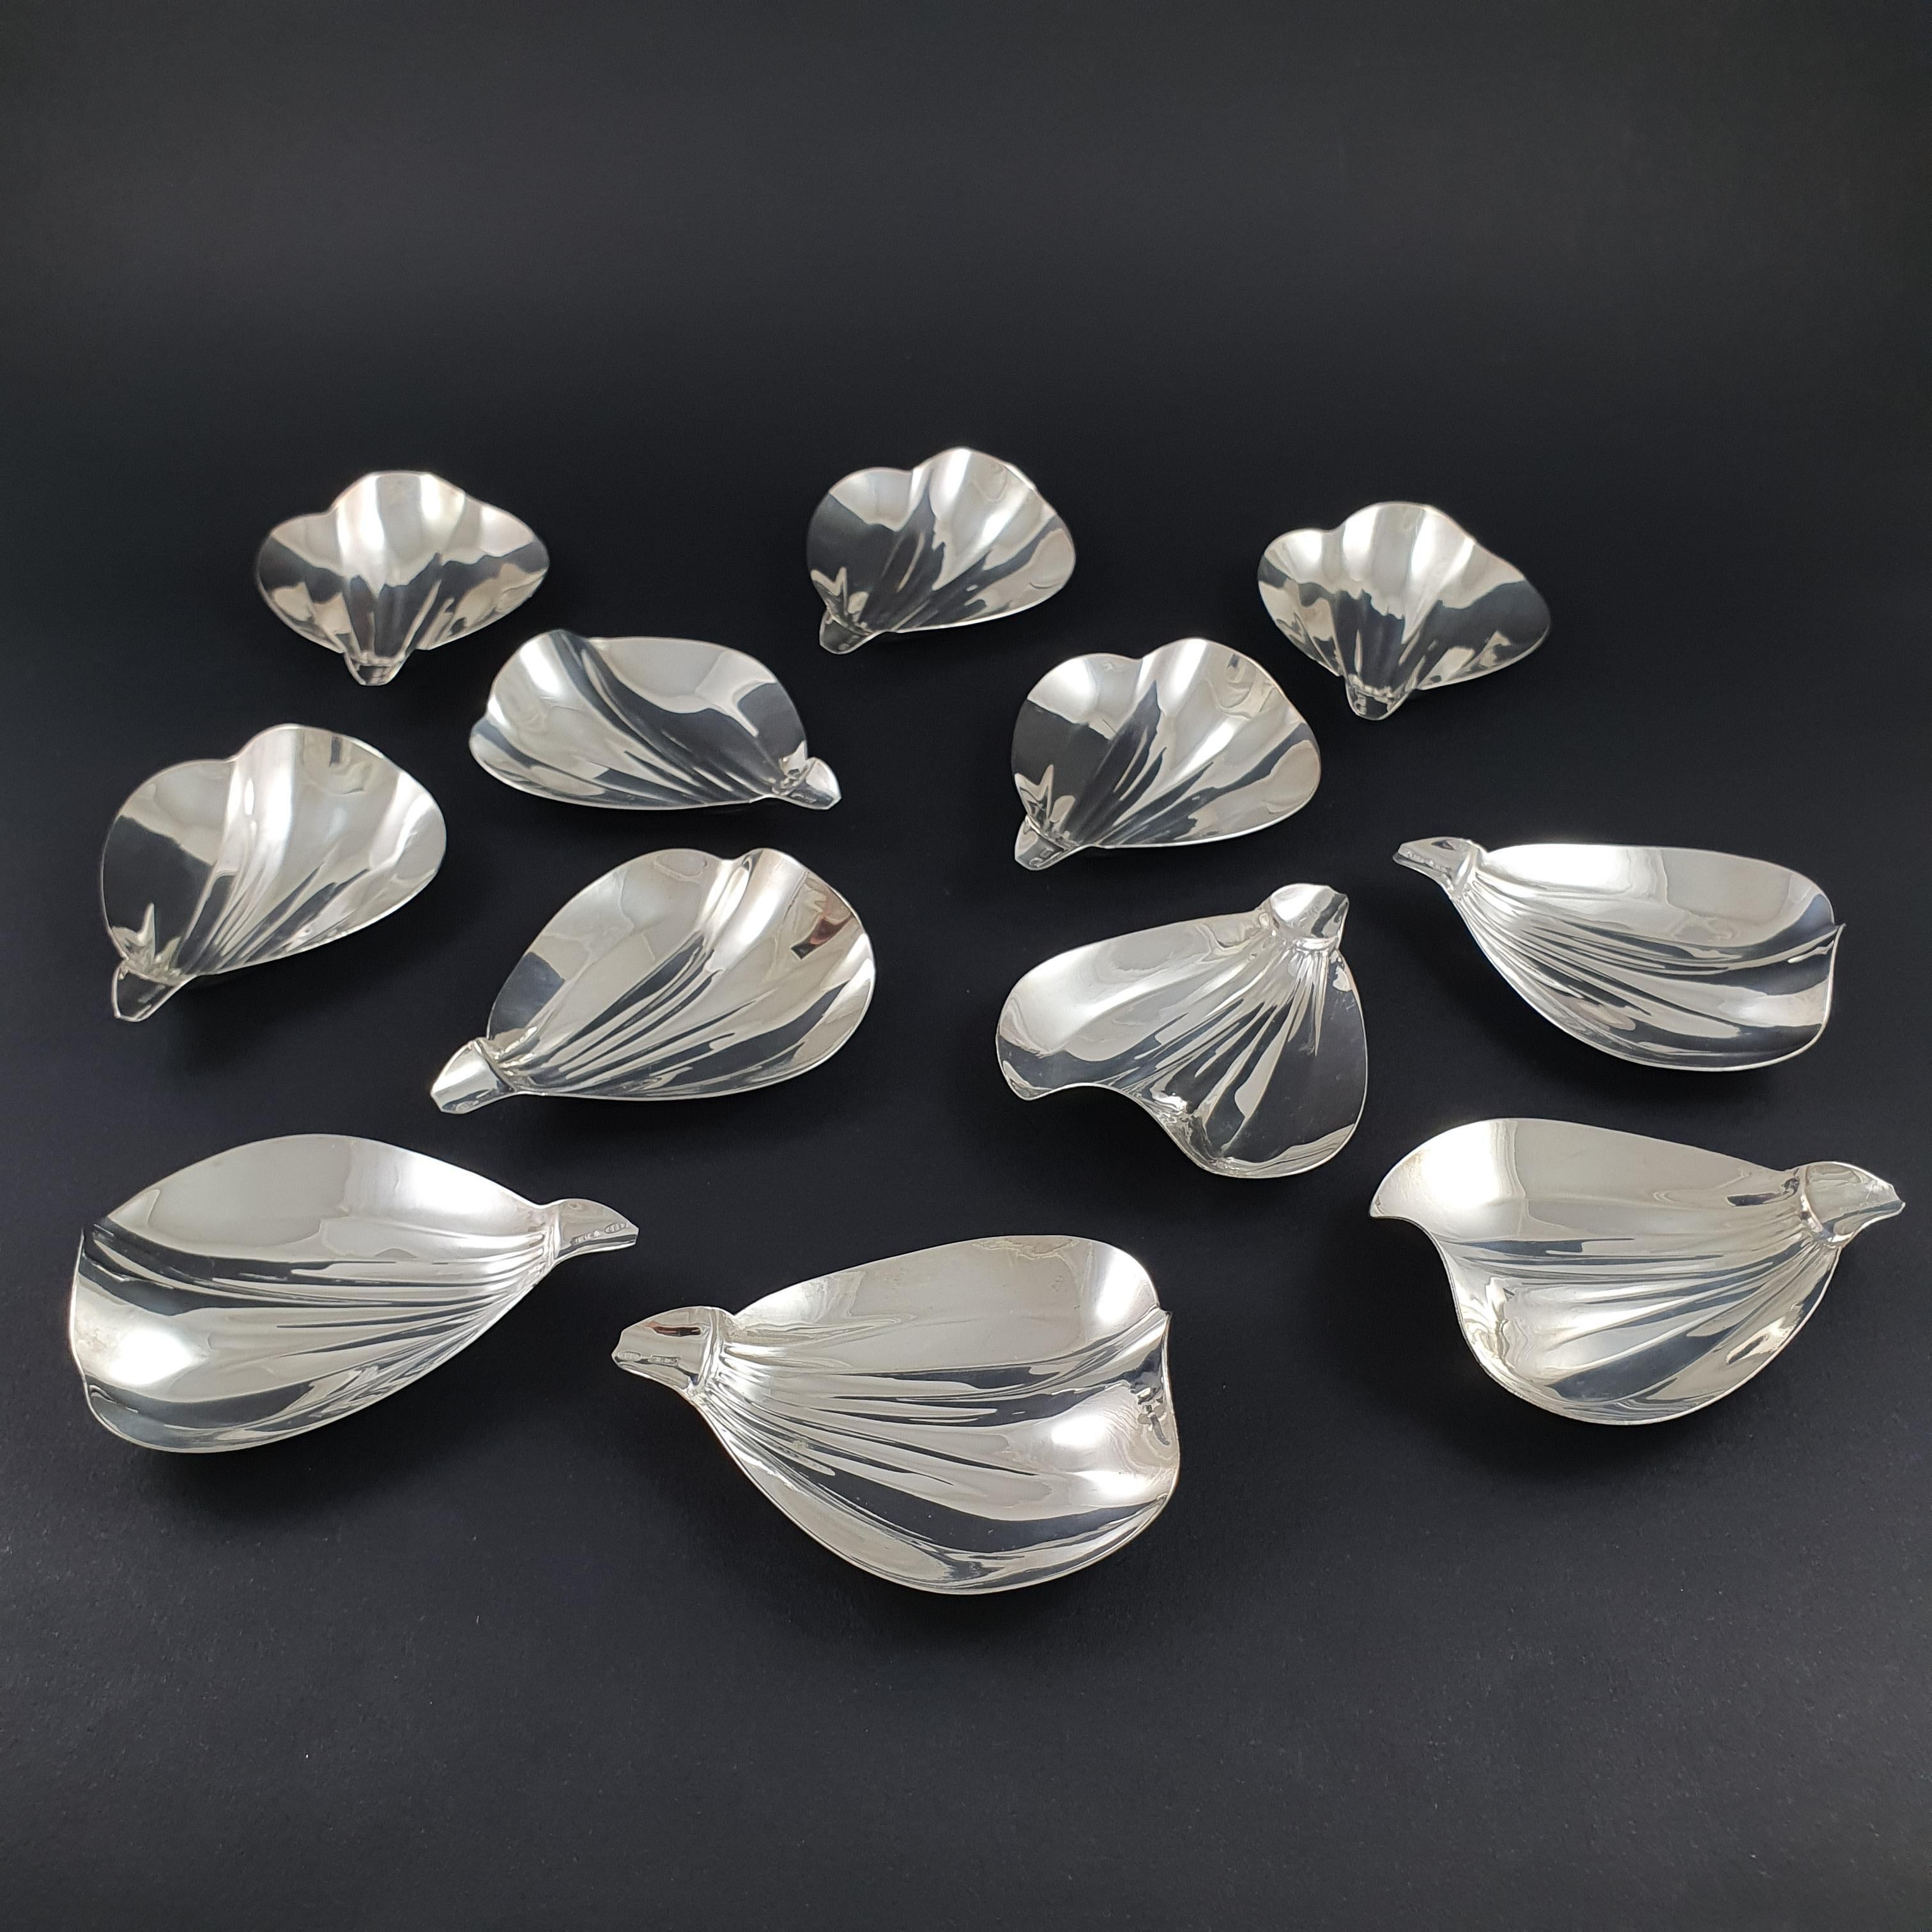 12 solid silver cups from the 20th century in leaf-shaped 

Silver hallmark 800 

Circa 1970 

Measures: Length: 7.3 cm 
Width: 5.9 cm 
Weight: 233 grams

Great condition.